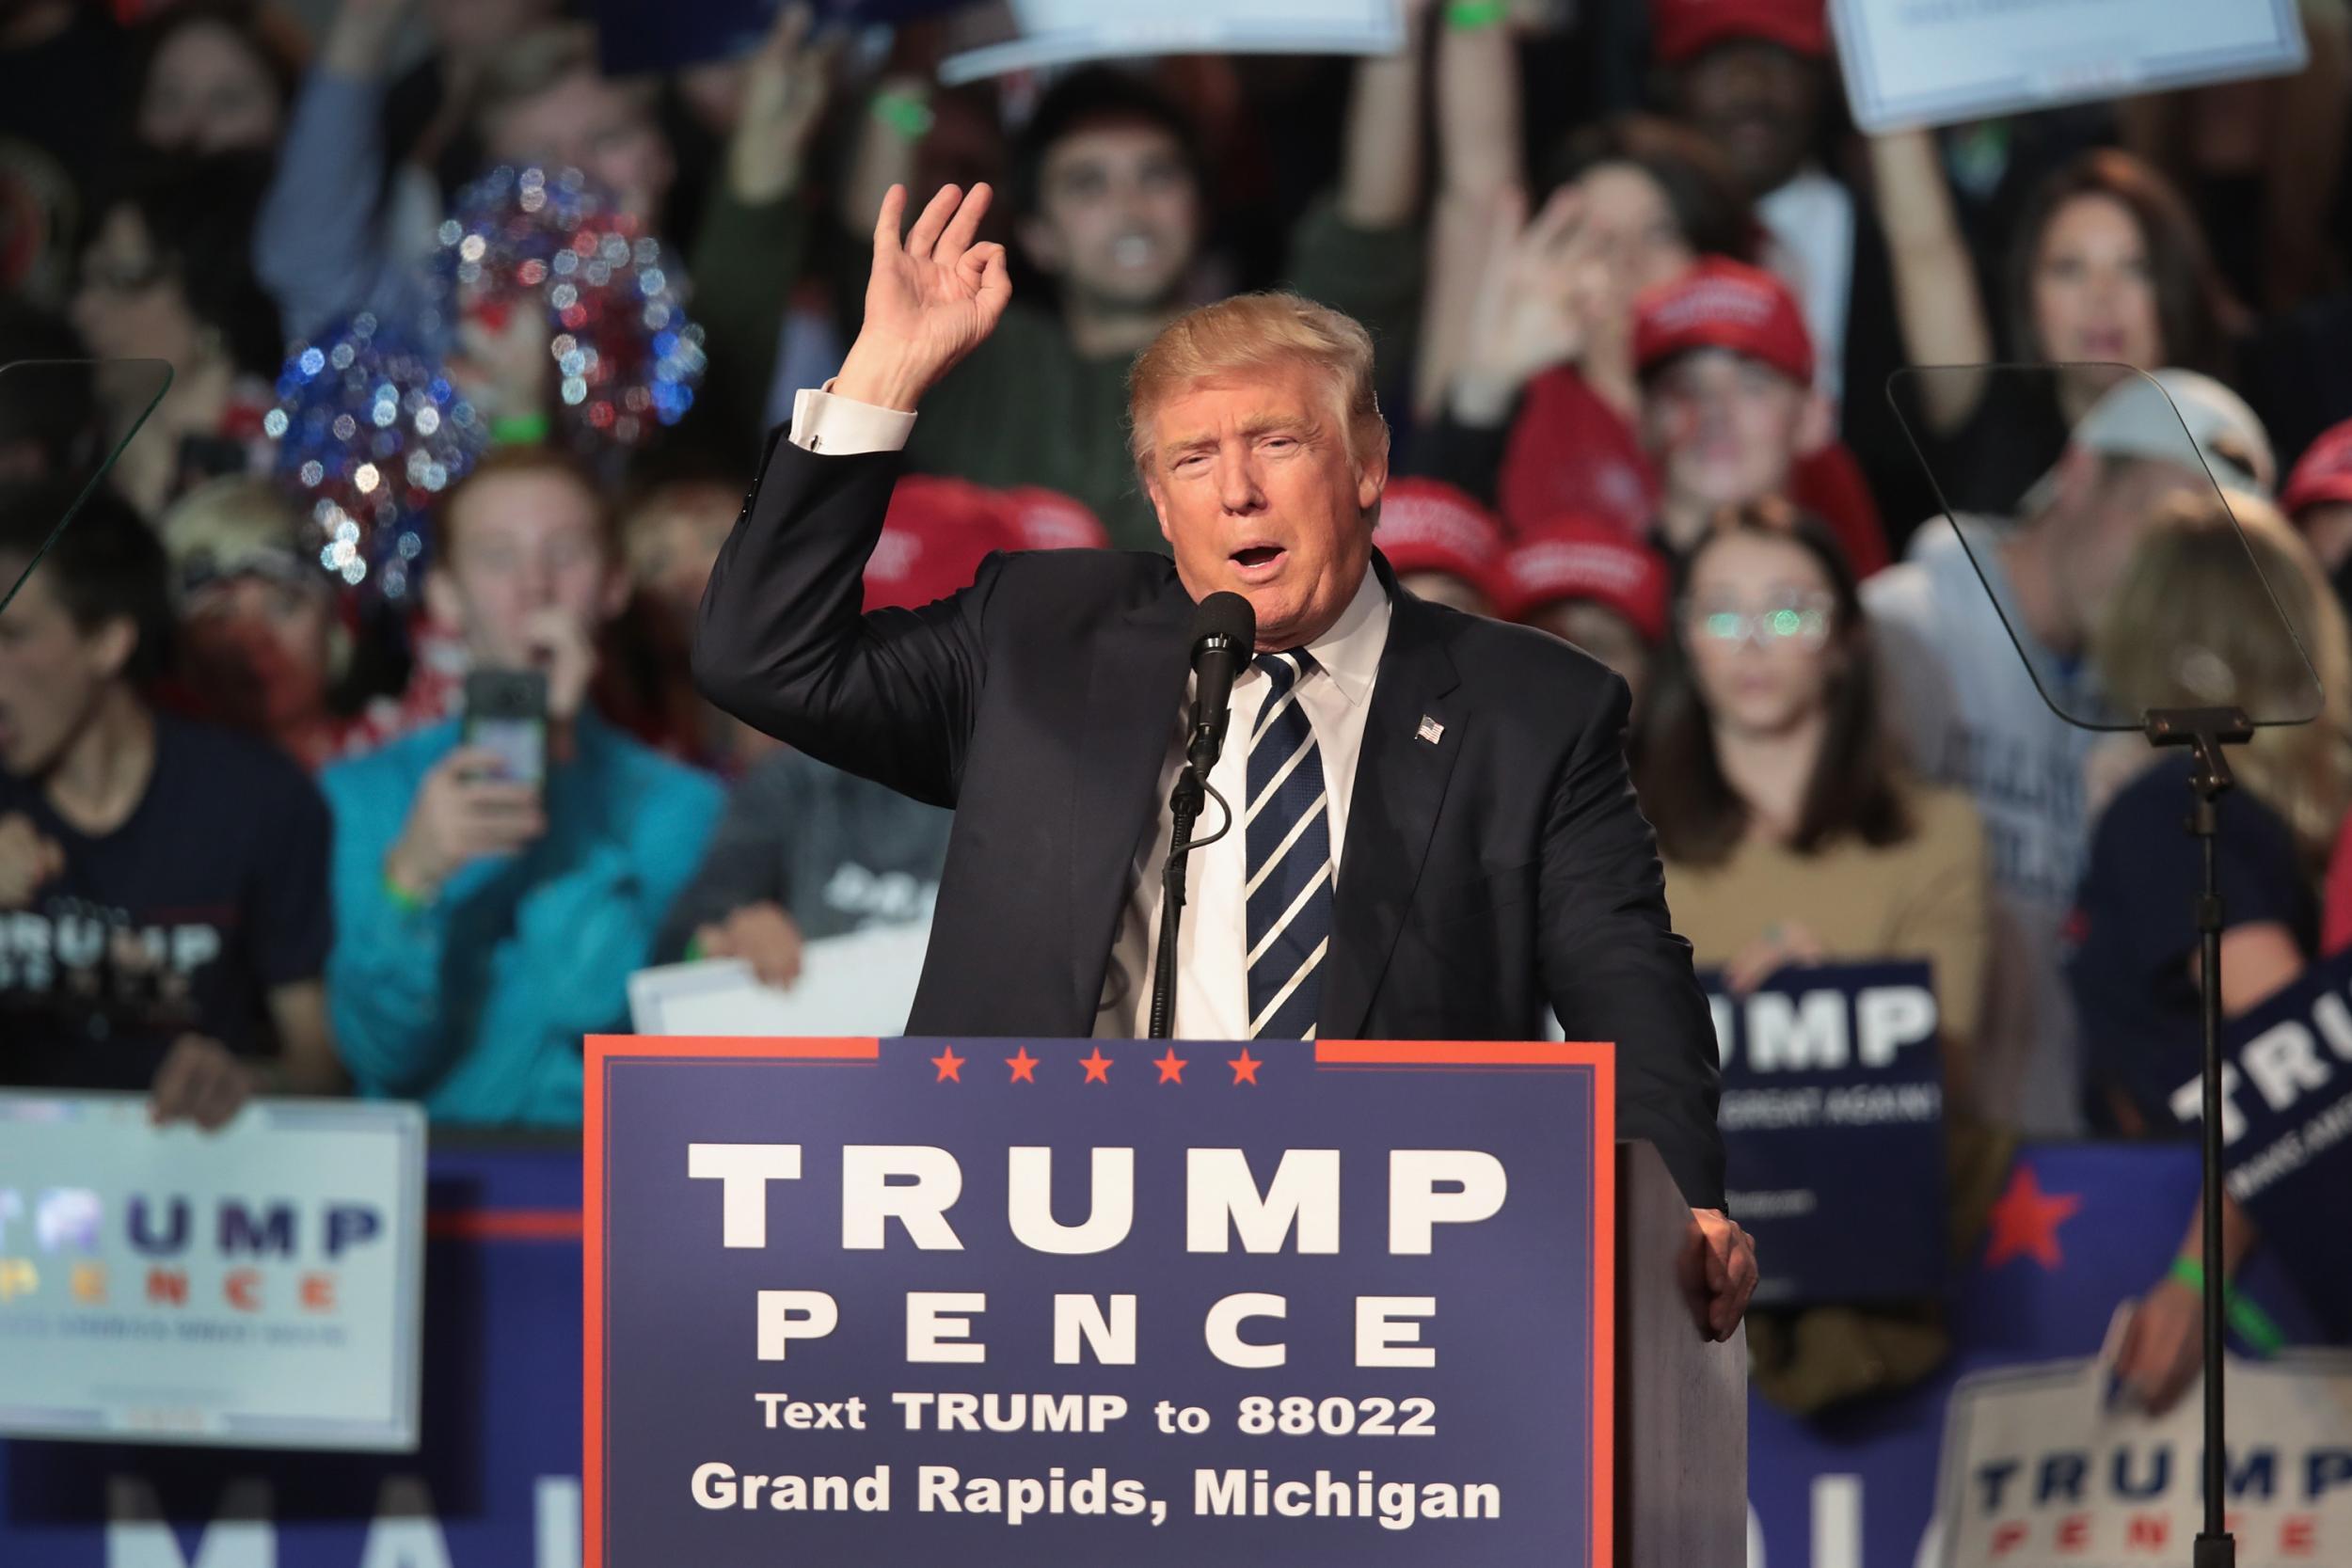 Republican presidential nominee Donald Trump addresses supporters during a campaign rally